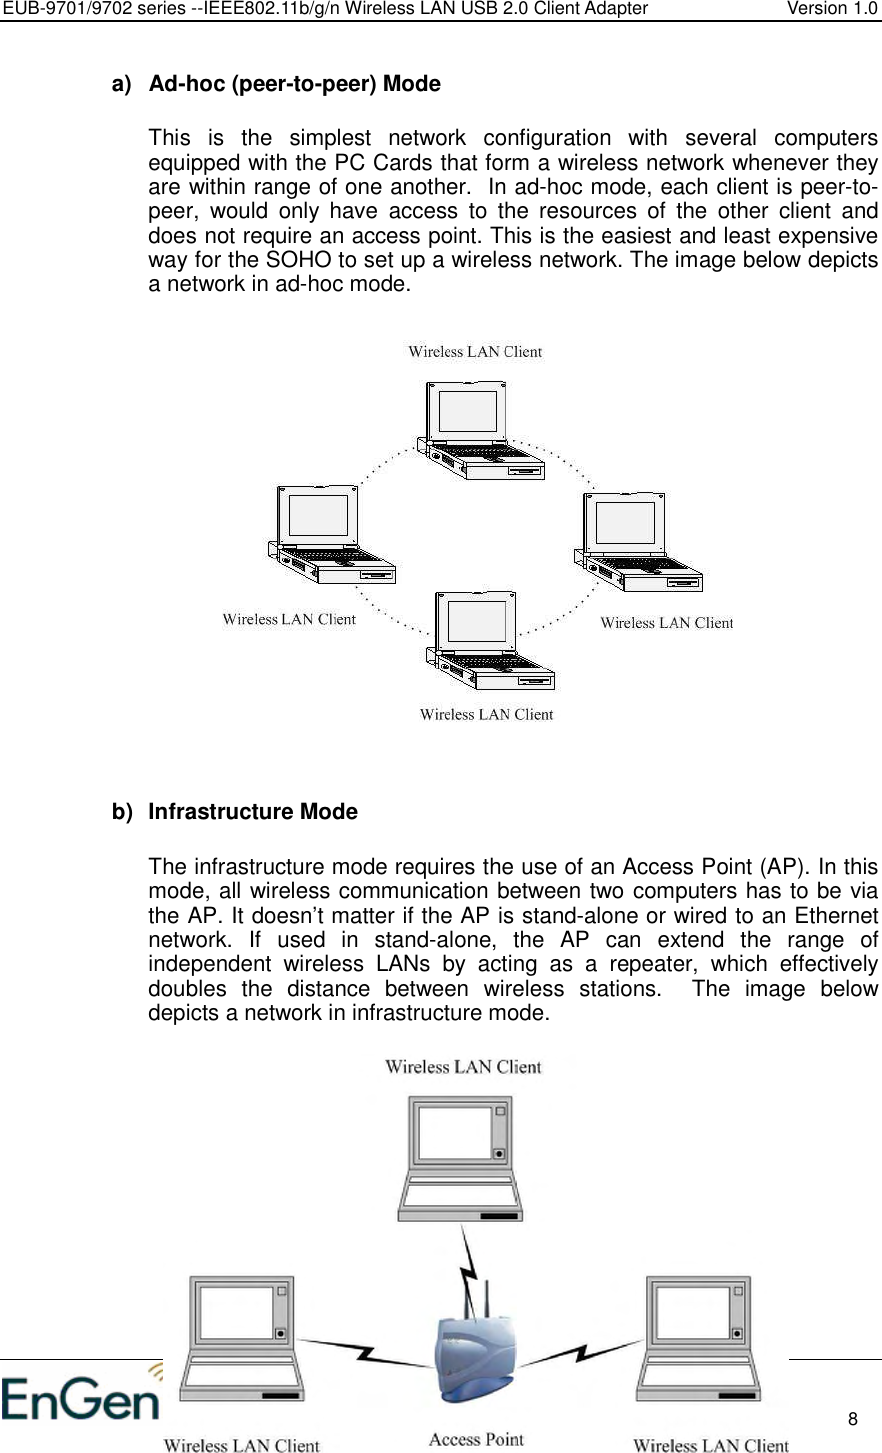 EUB-9701/9702 series --IEEE802.11b/g/n Wireless LAN USB 2.0 Client Adapter  Version 1.0                                                                                                                          8  a)  Ad-hoc (peer-to-peer) Mode  This  is  the  simplest  network  configuration  with  several  computers equipped with the PC Cards that form a wireless network whenever they are within range of one another.  In ad-hoc mode, each client is peer-to-peer,  would  only  have  access  to  the  resources  of  the  other  client  and does not require an access point. This is the easiest and least expensive way for the SOHO to set up a wireless network. The image below depicts a network in ad-hoc mode.                    b)  Infrastructure Mode  The infrastructure mode requires the use of an Access Point (AP). In this mode, all wireless communication between two computers has to be via the AP. It doesn’t matter if the AP is stand-alone or wired to an Ethernet network.  If  used  in  stand-alone,  the  AP  can  extend  the  range  of independent  wireless  LANs  by  acting  as  a  repeater,  which  effectively doubles  the  distance  between  wireless  stations.    The  image  below depicts a network in infrastructure mode.               